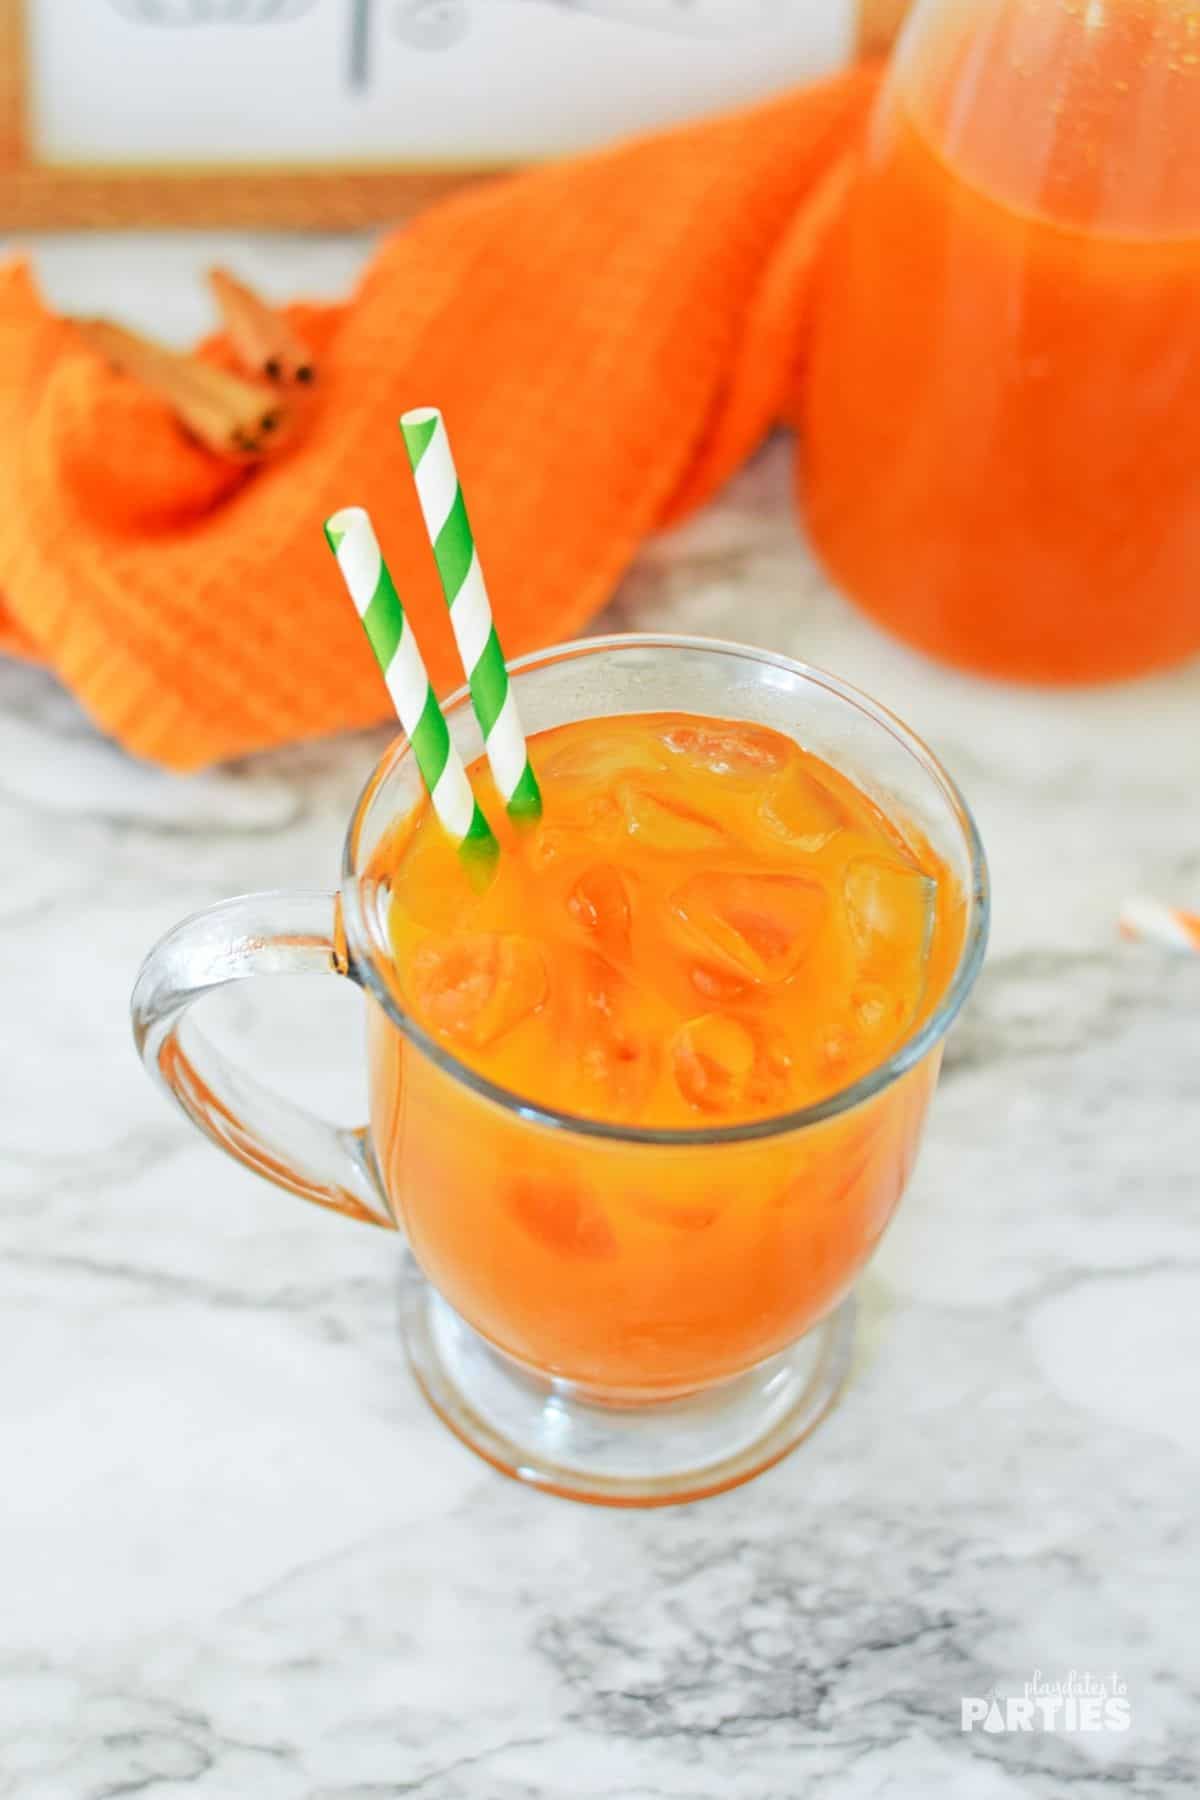 A mug filled with pumpkin juice with two green paper straws.